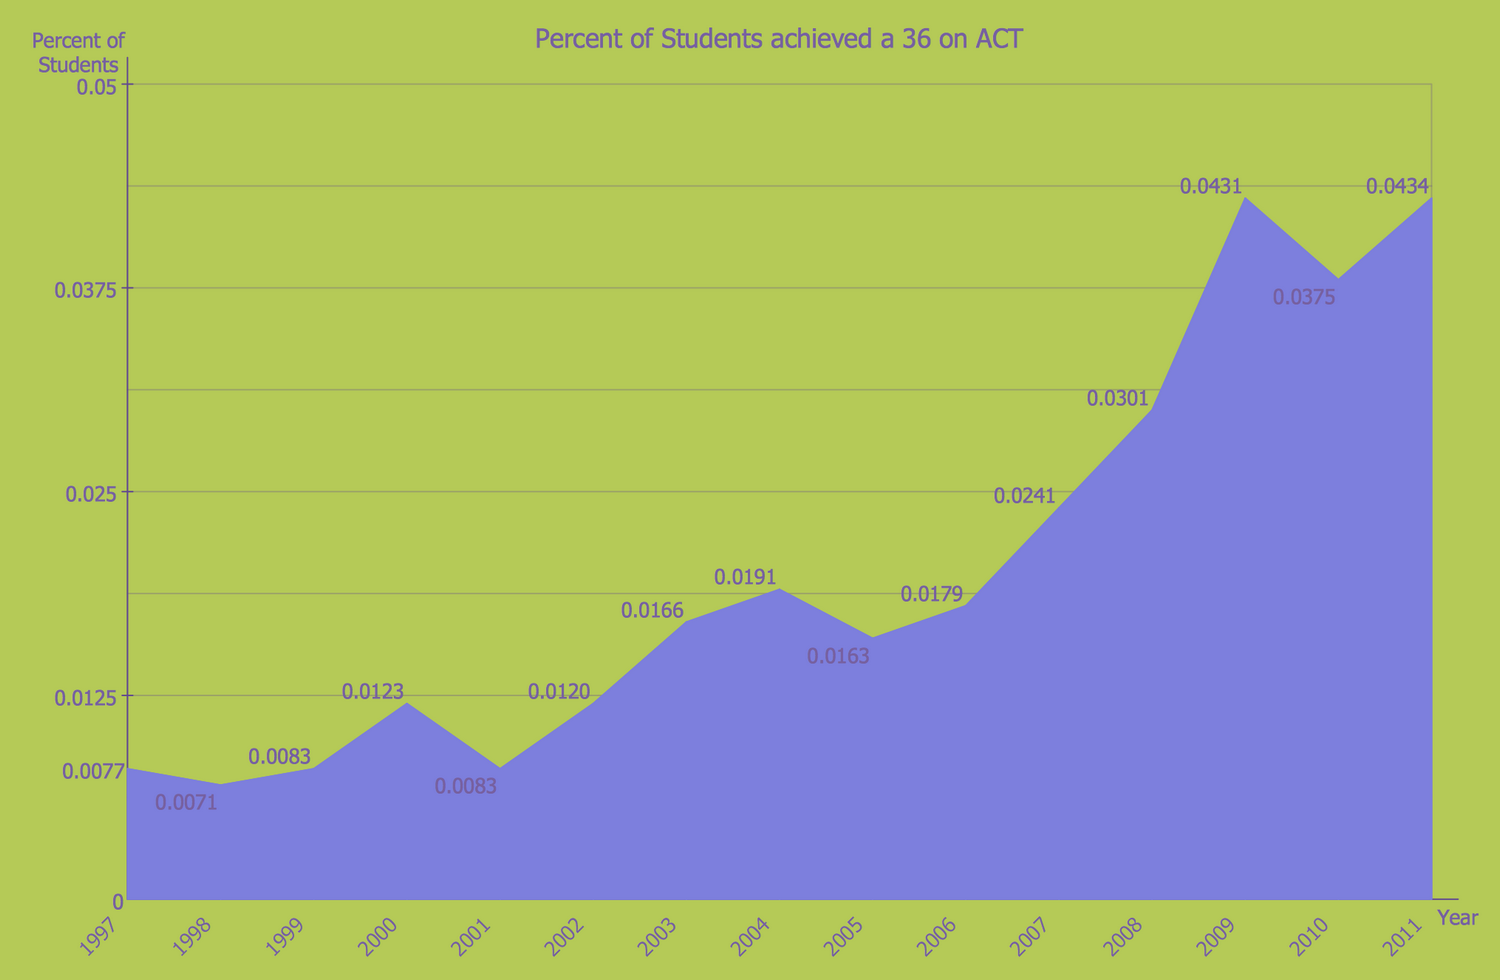 Percent of Students Achieved a 36 on ACT